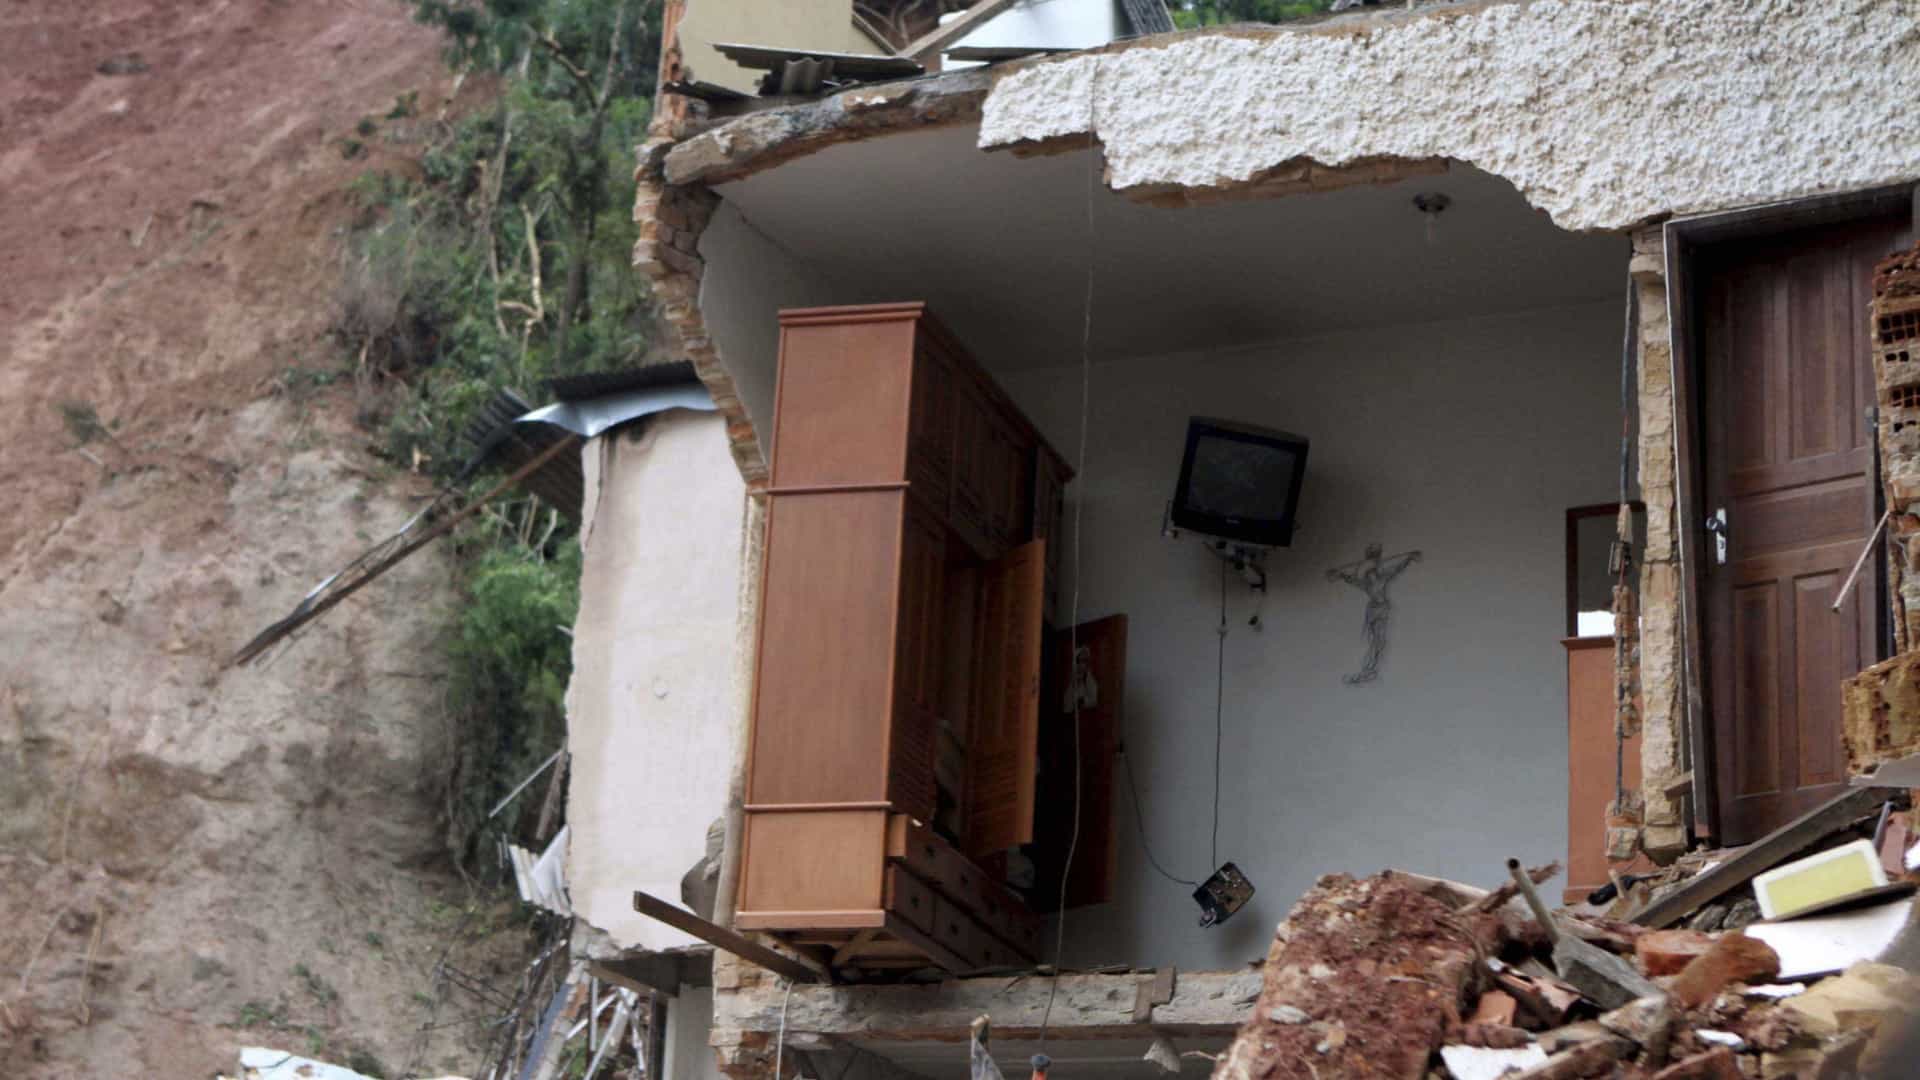 A landslide in the upper part of the Mangueira favela in the north zone of Rio de Janeiro affected 12 homes in the early hours of yesterday, August 7th.